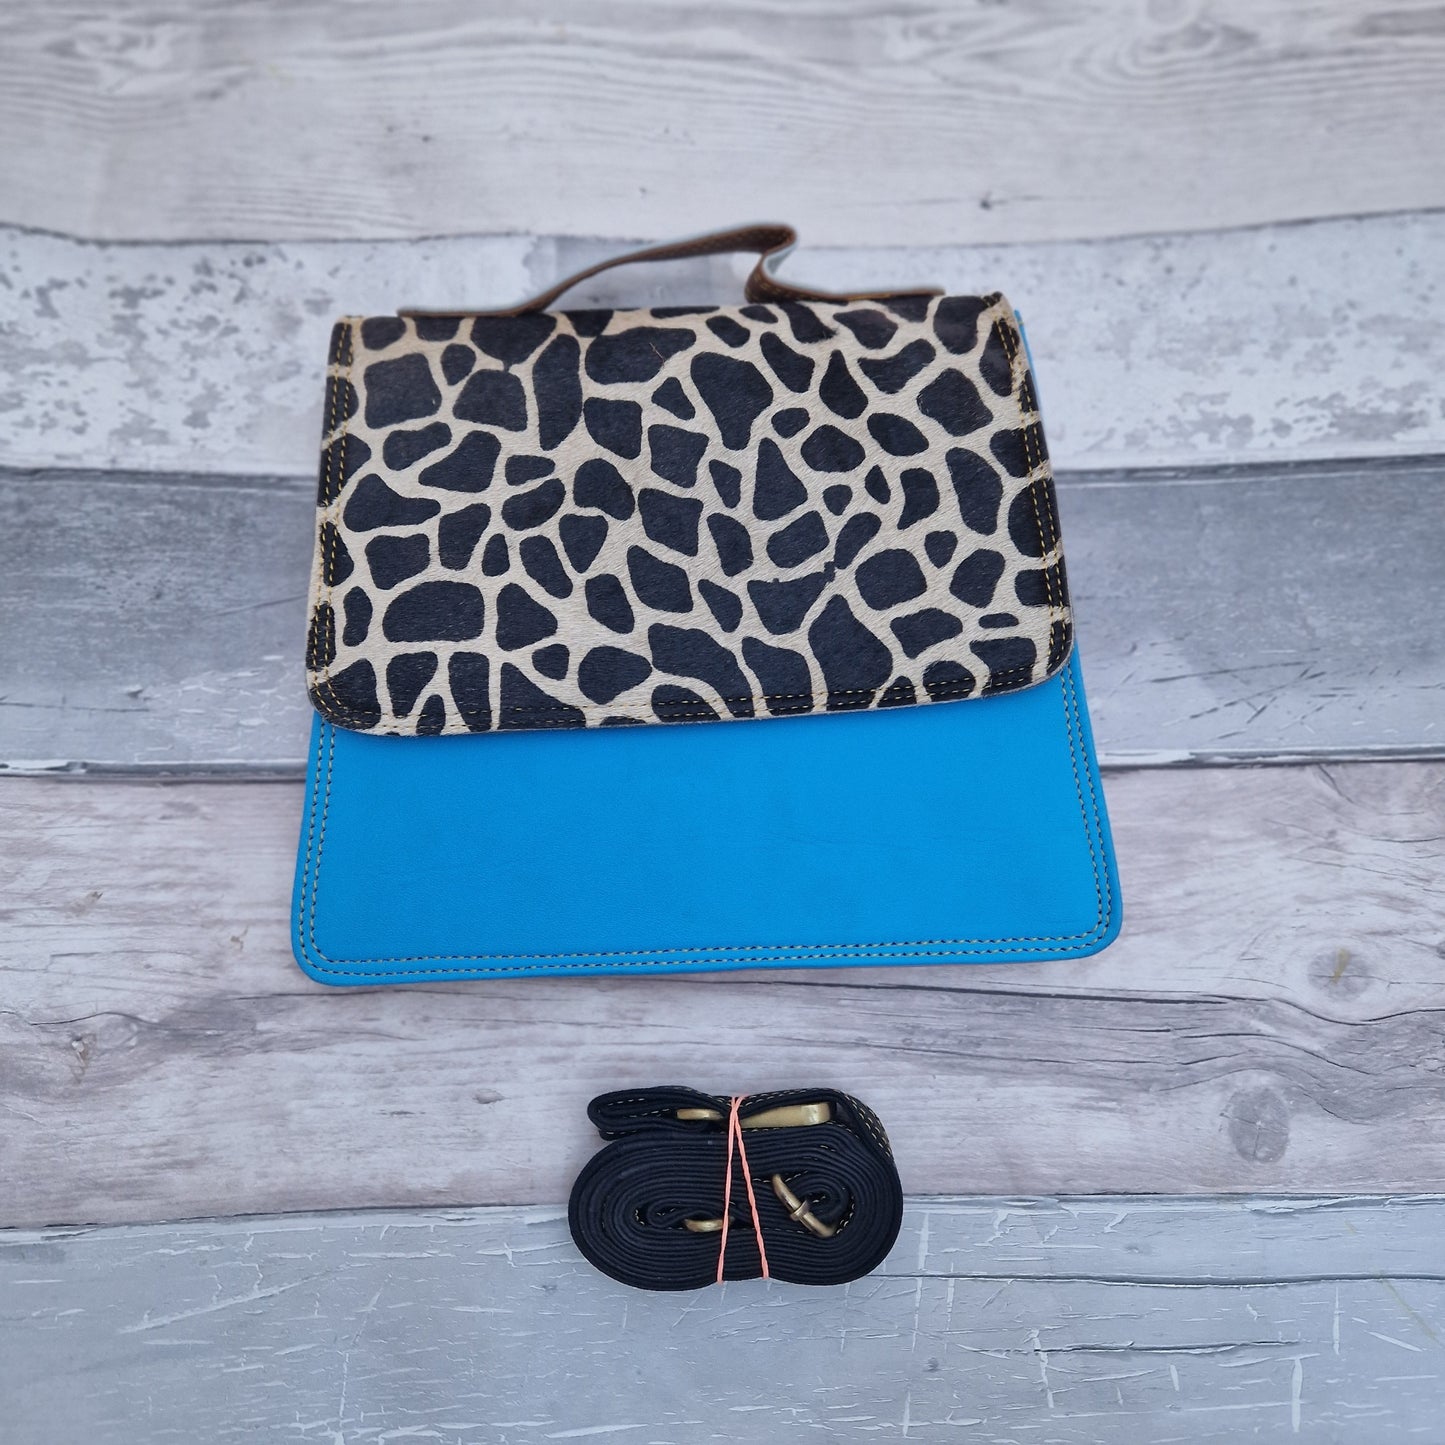 Bright Blue leather bag with a textured front panel in a giraffe print.